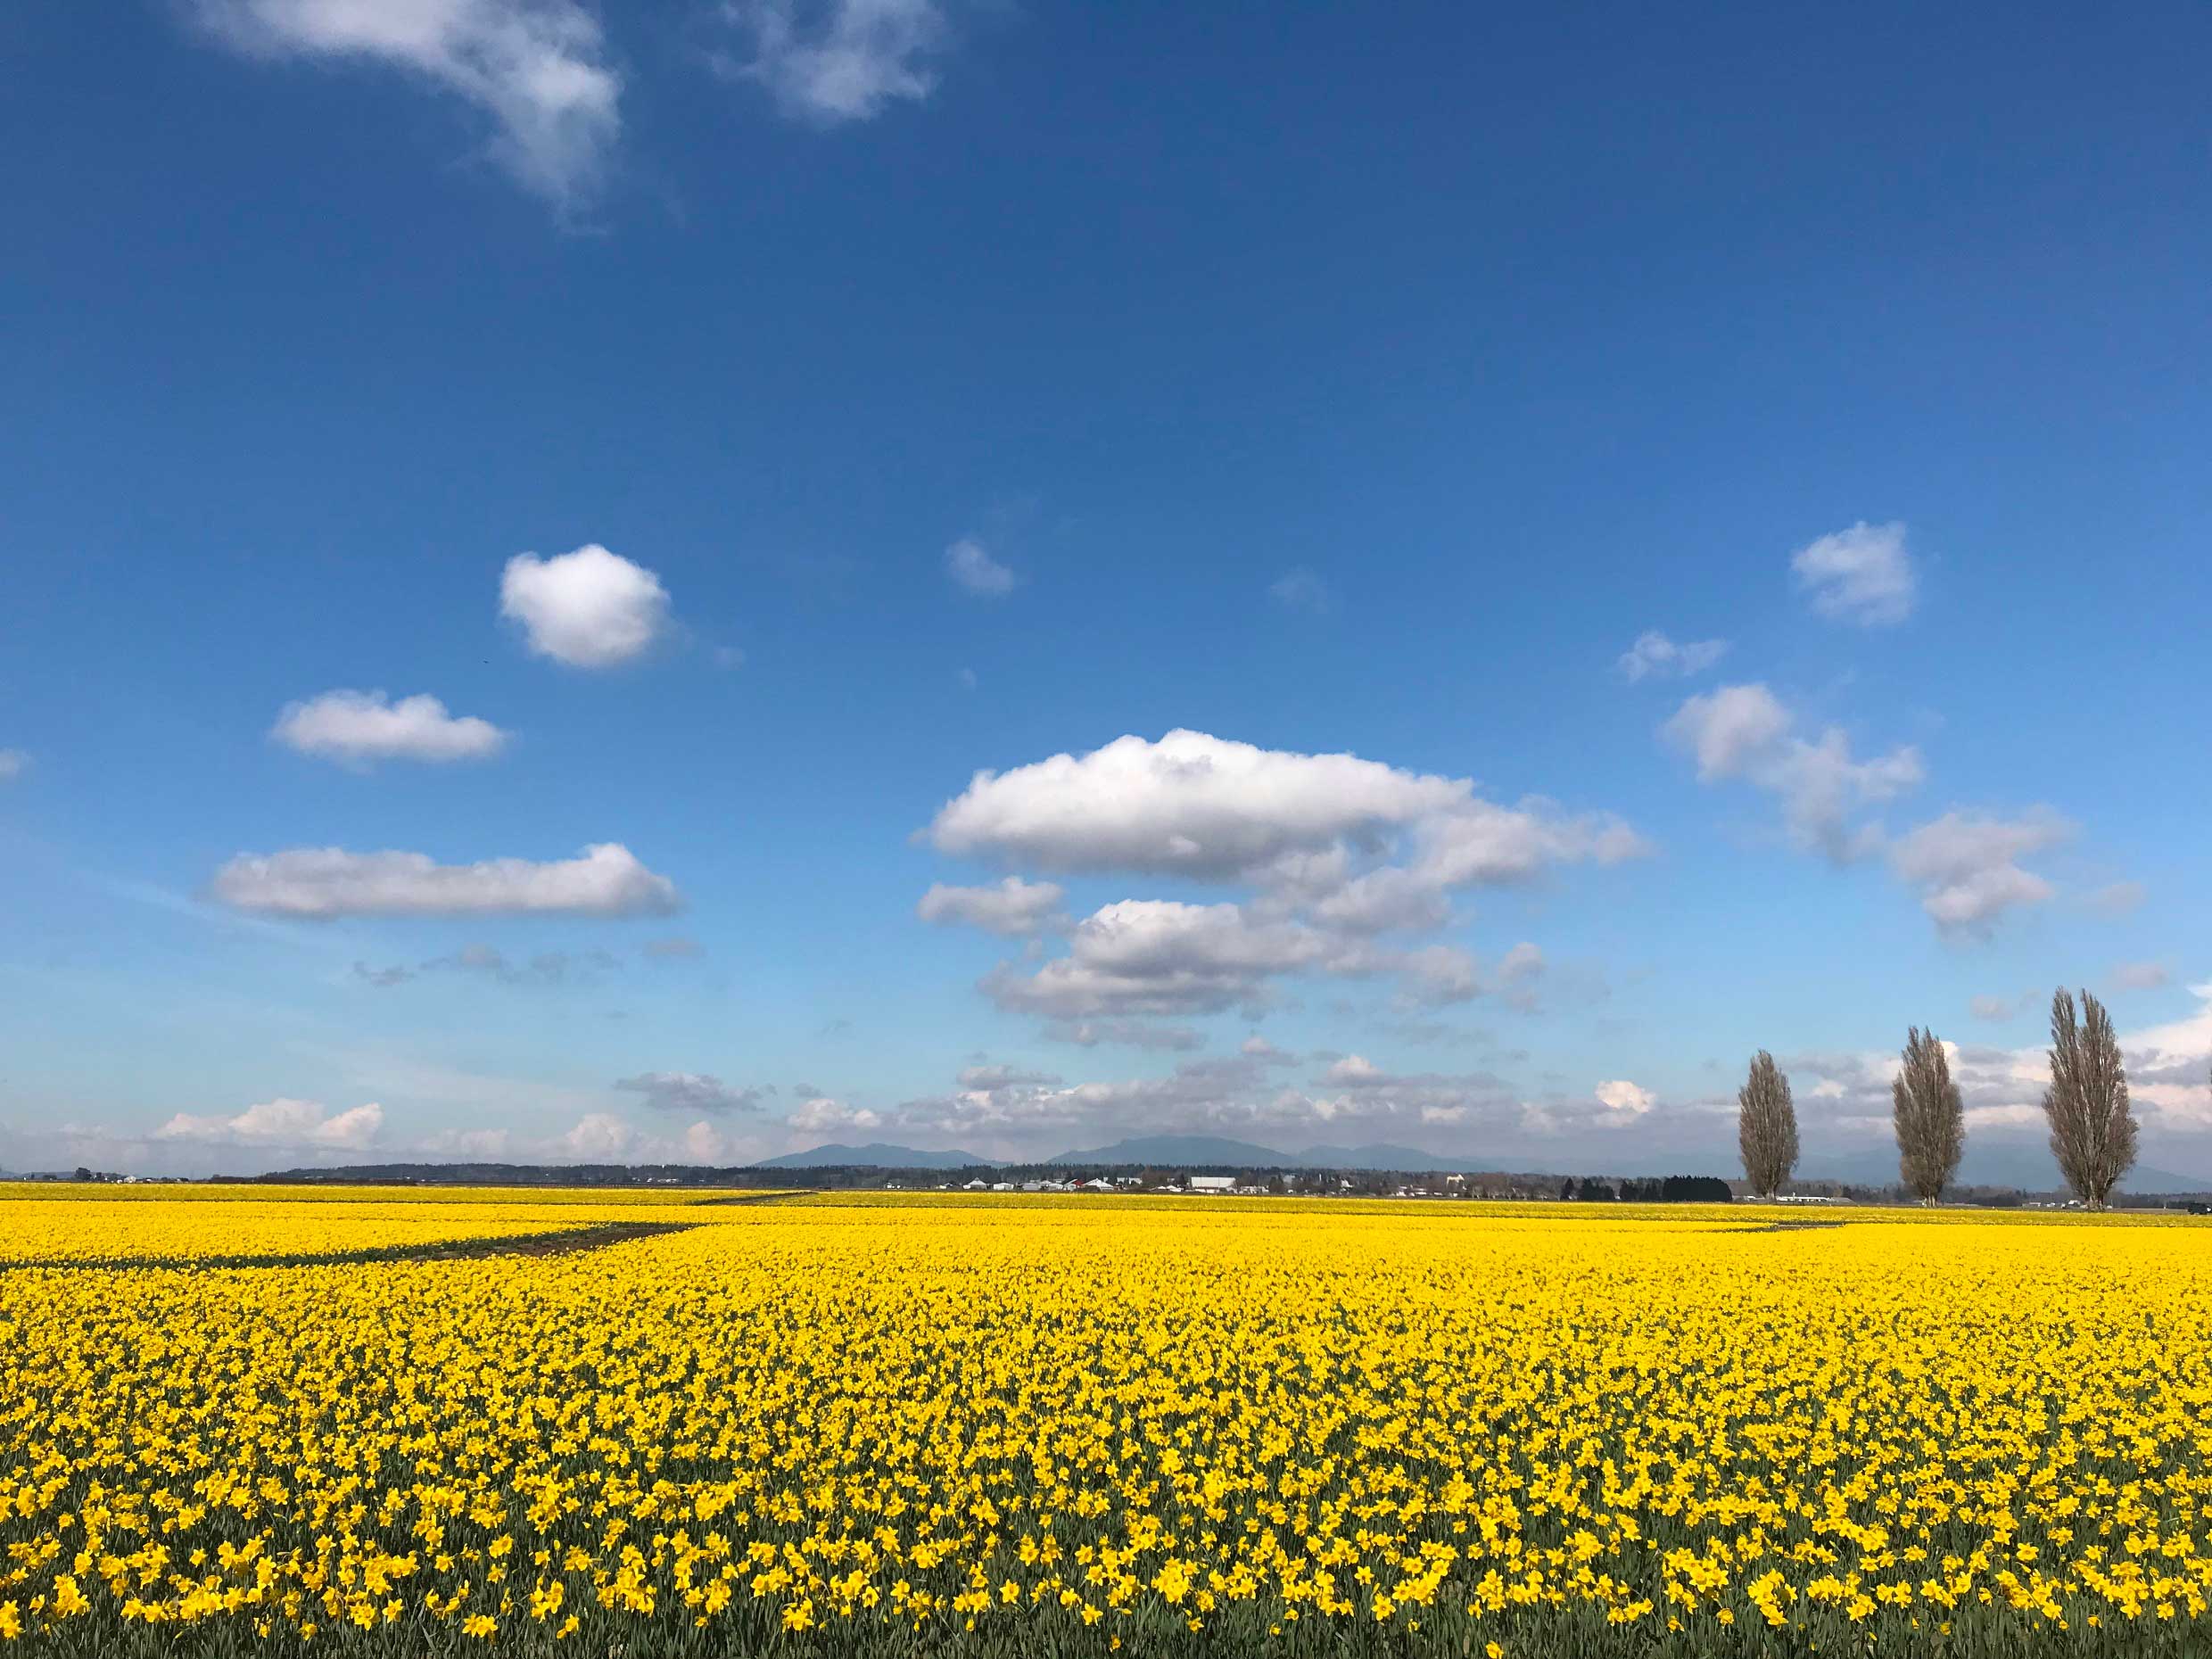 A day in the daffodil fields